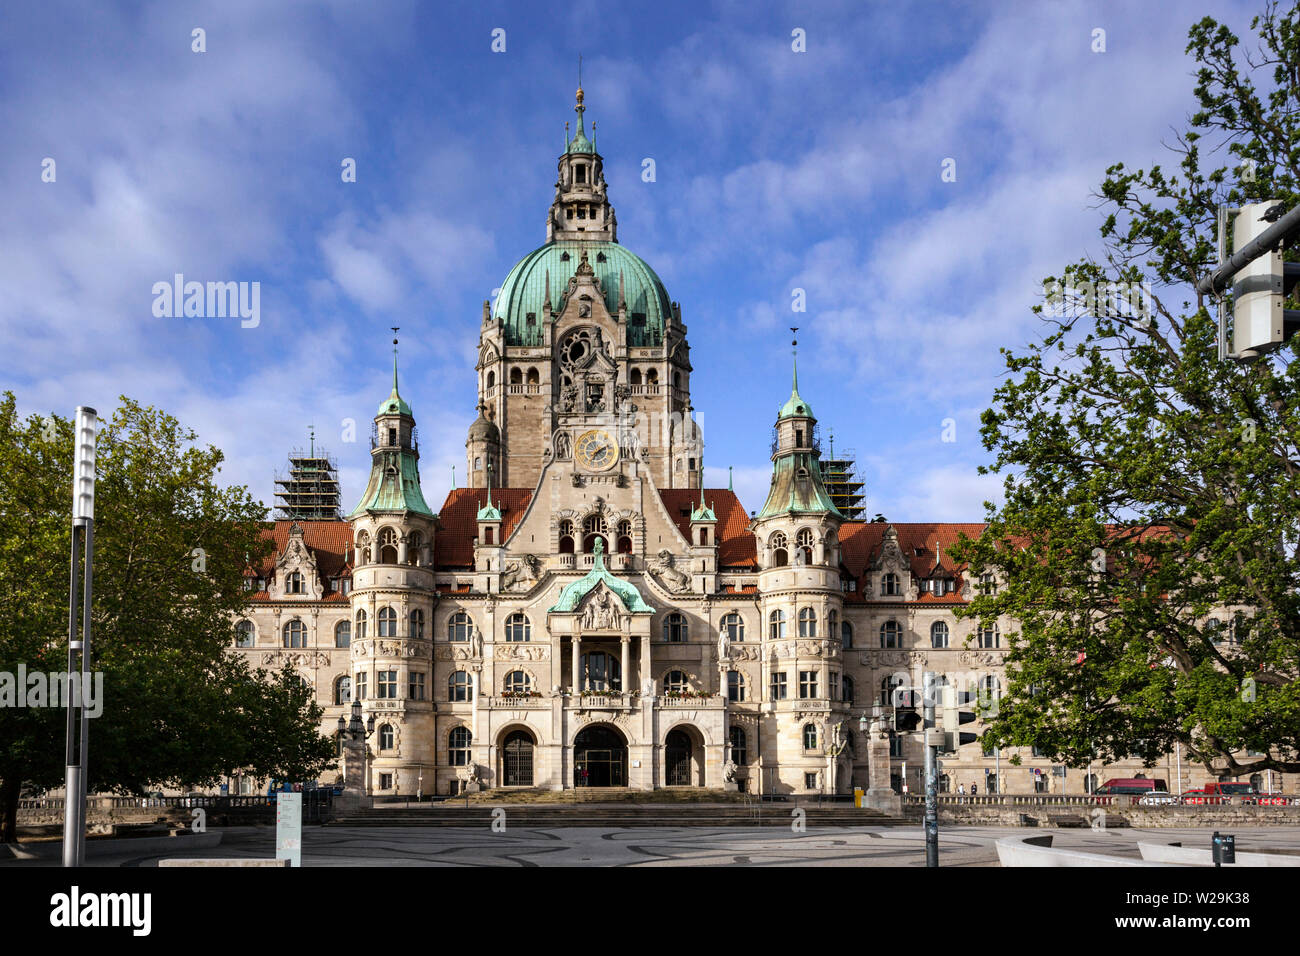 Neue Rathaus - New Town Hall in Hanover Stock Photo